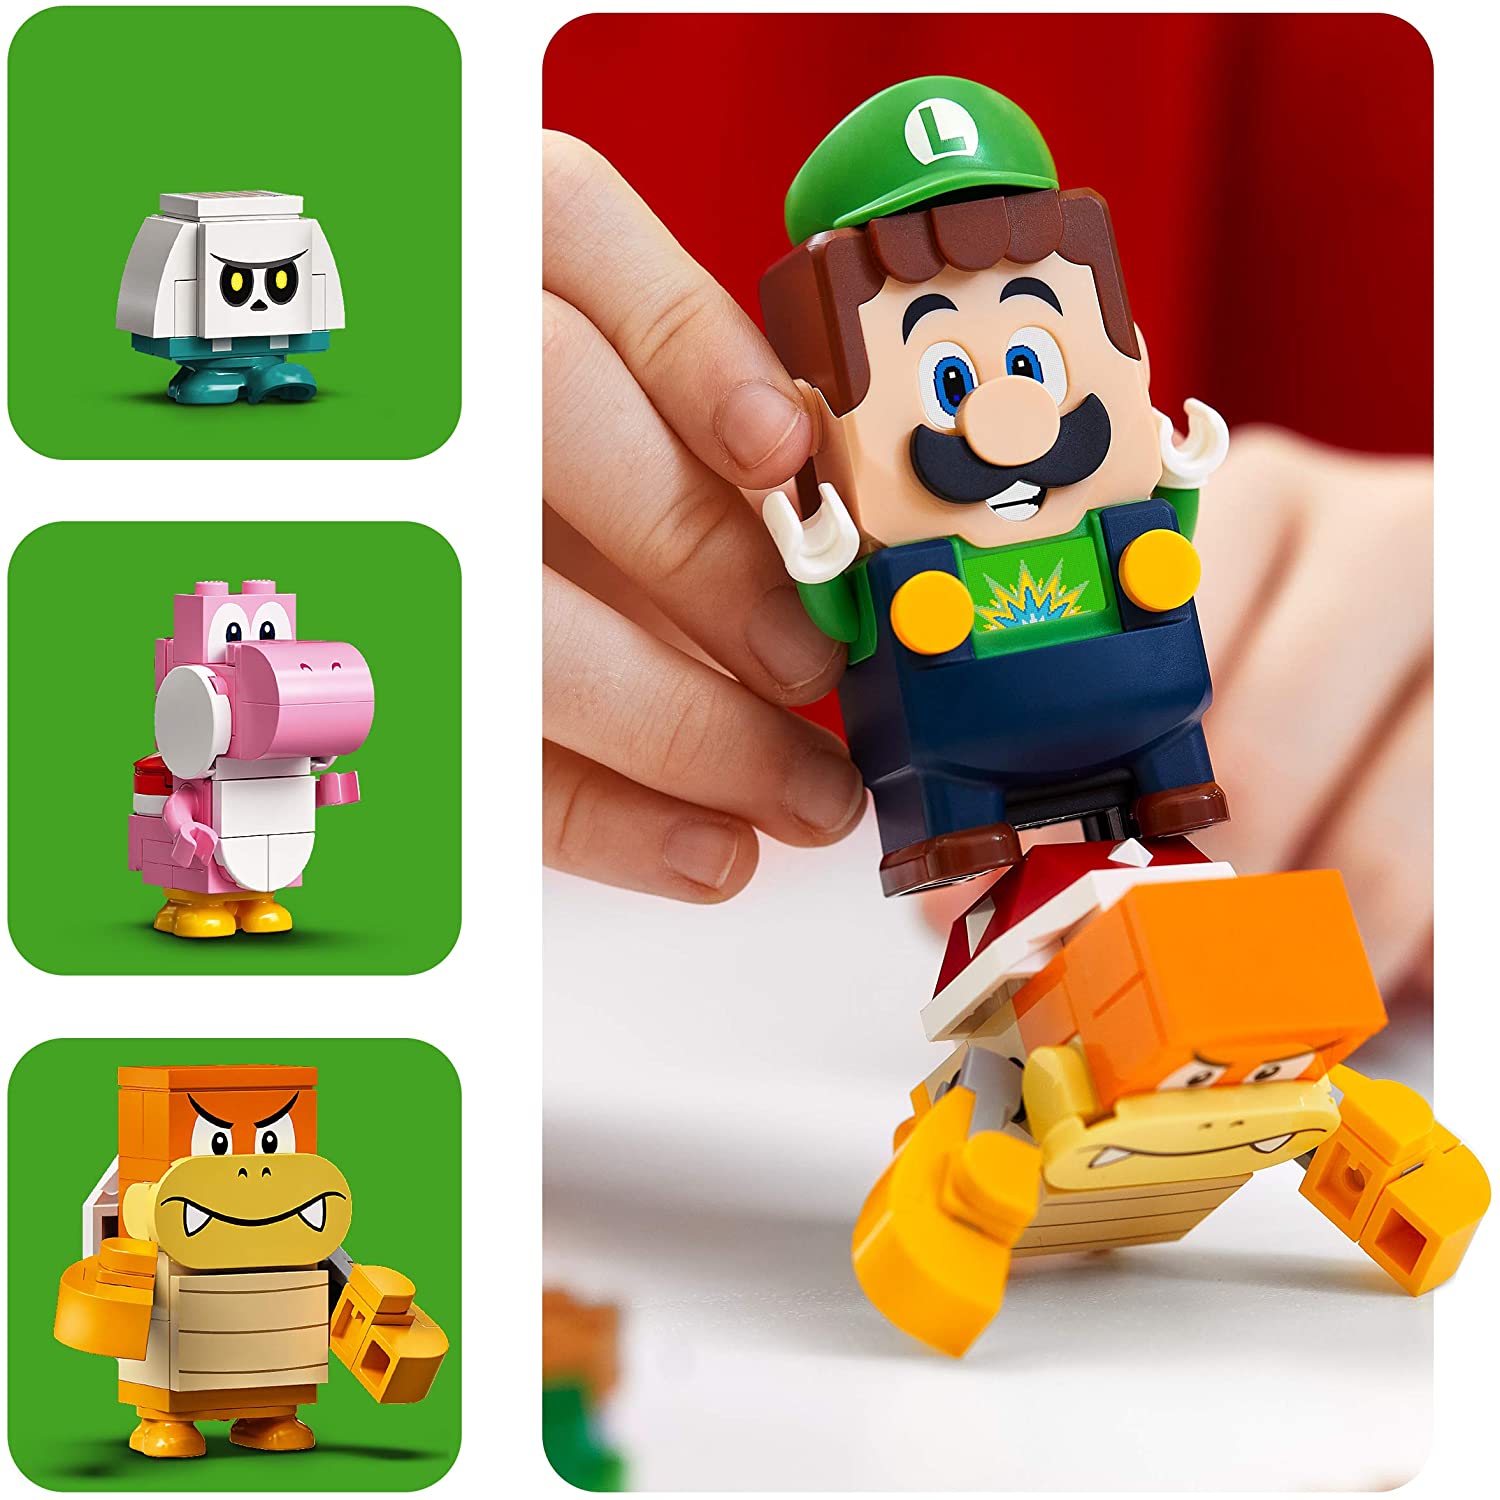 Image for Luigi is coming to join the Lego Super Mario range soon